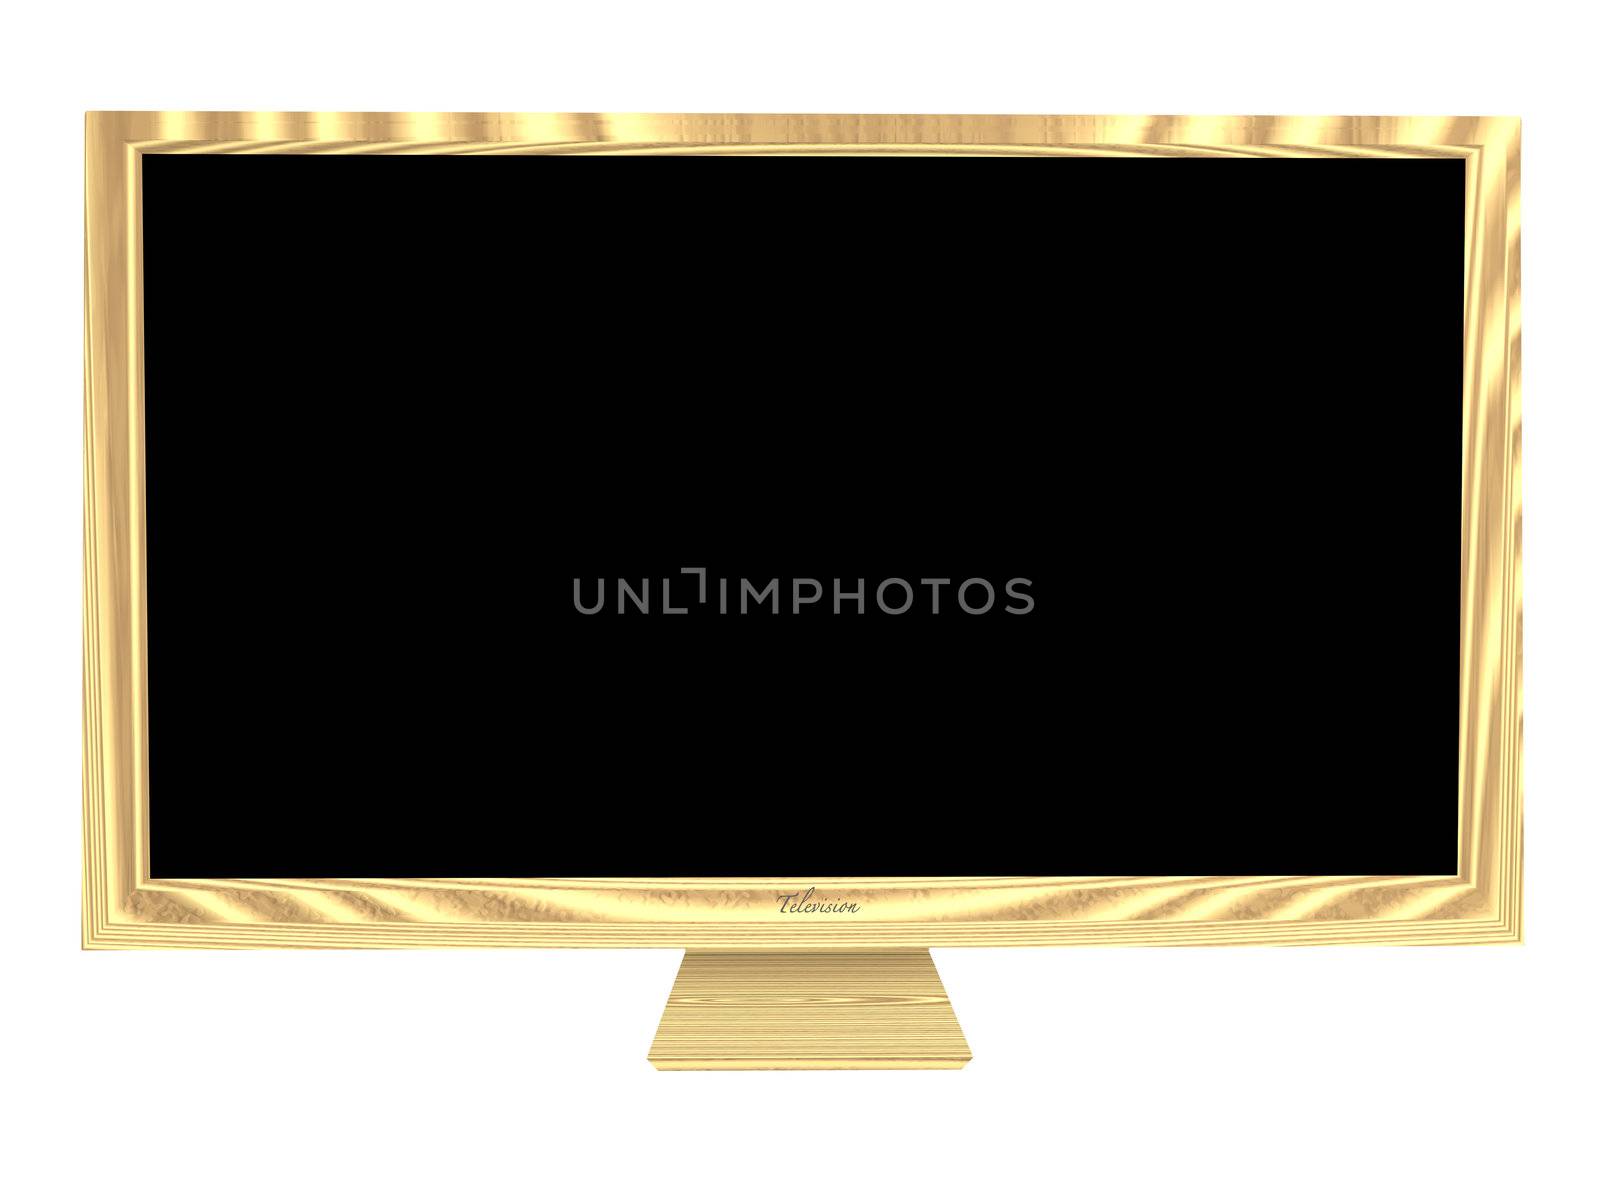 Brown wooden case on a modern flat screen television and blank area